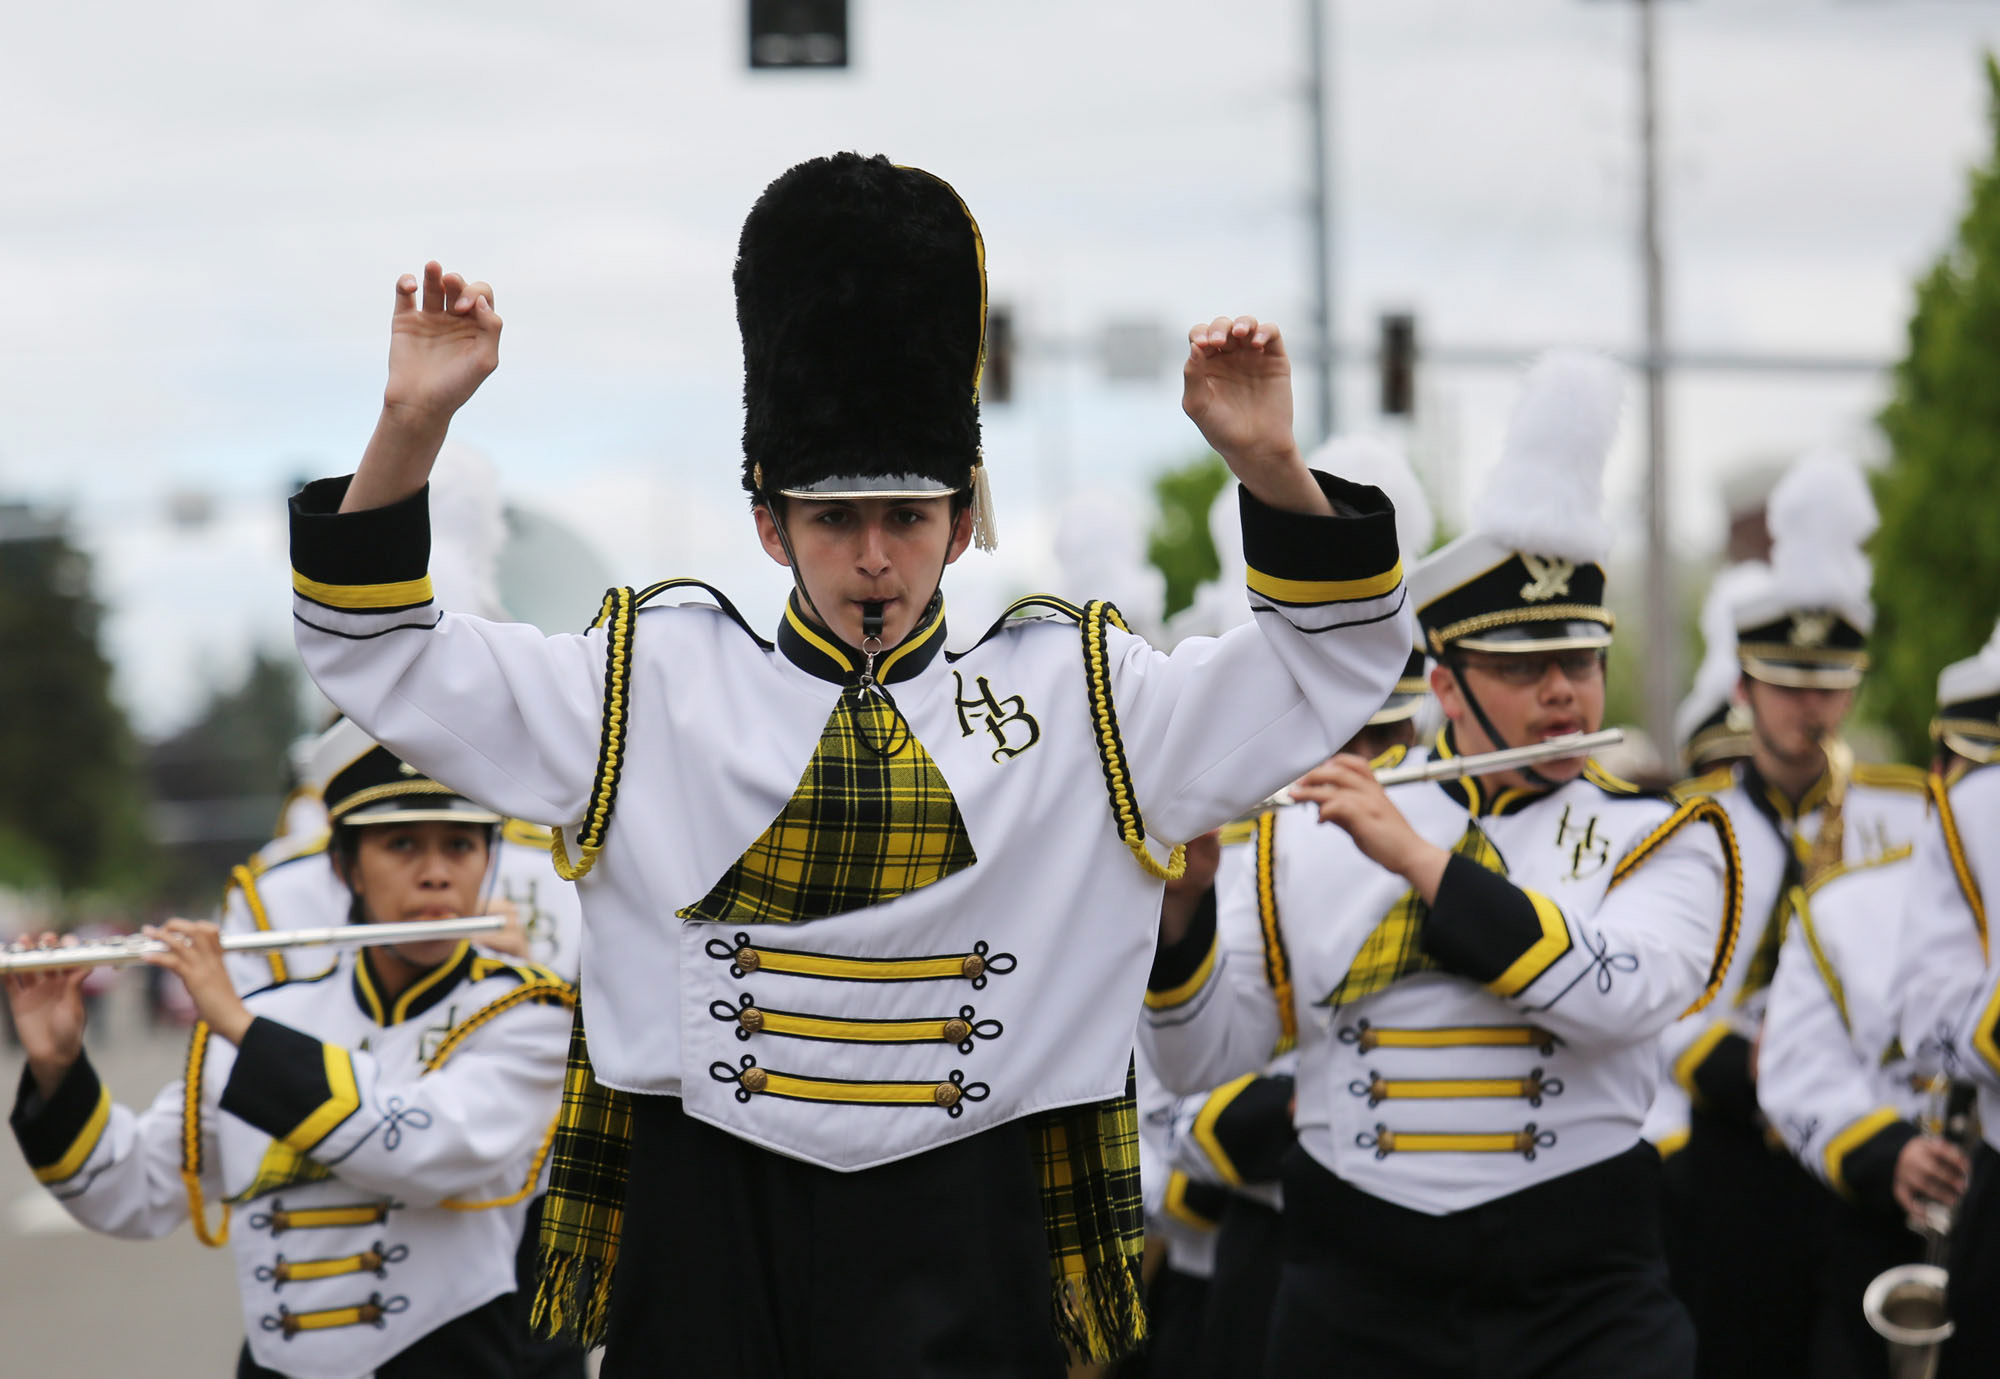 Hazel Dell Parade of Bands Photo Gallery The Columbian